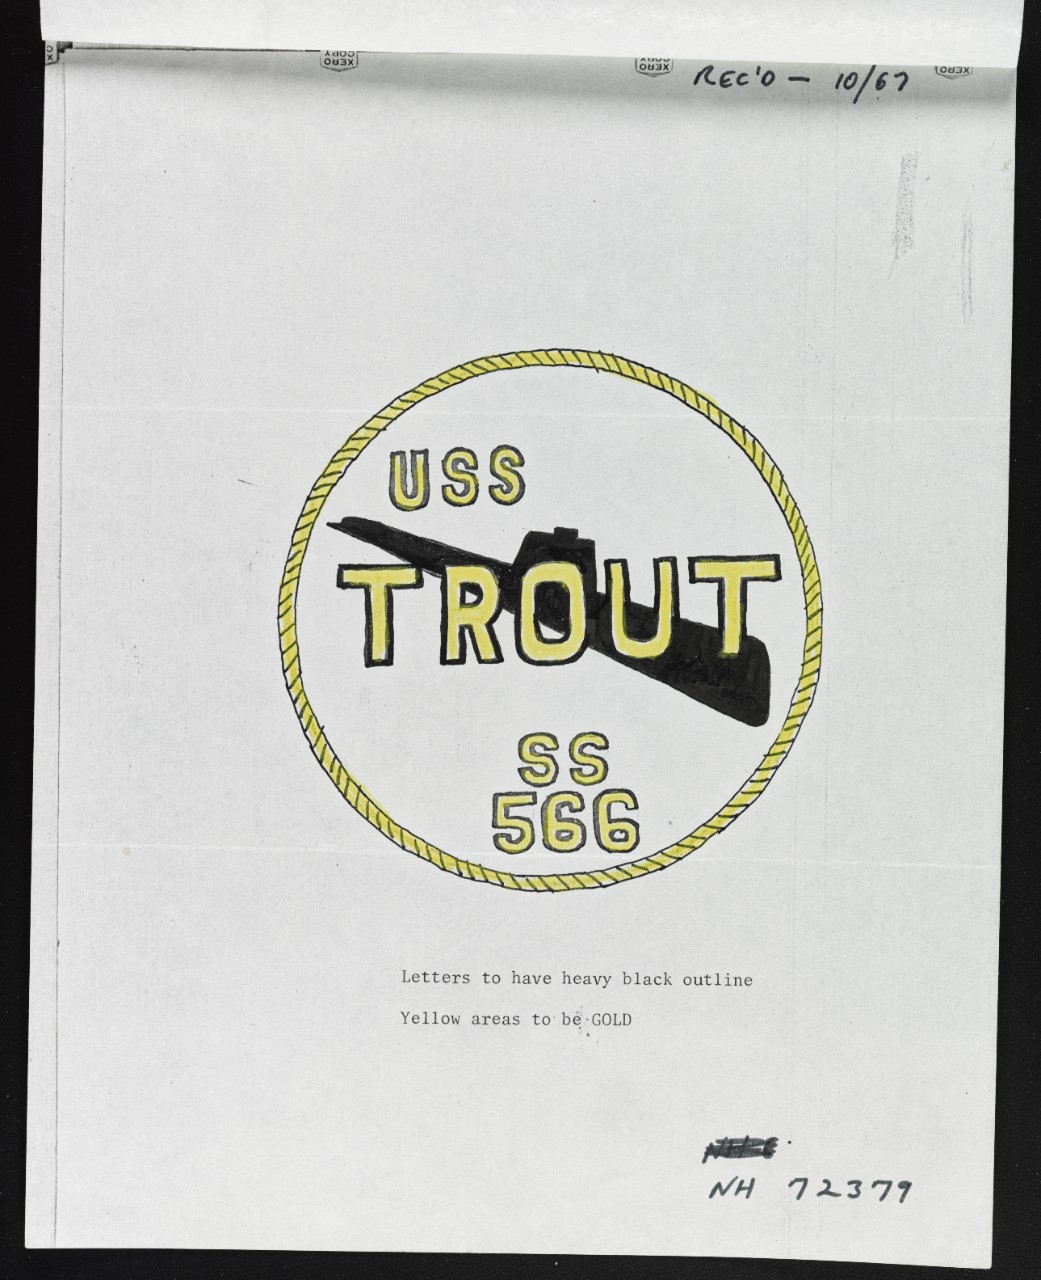 Insignia: USS TROUT (SS-566)